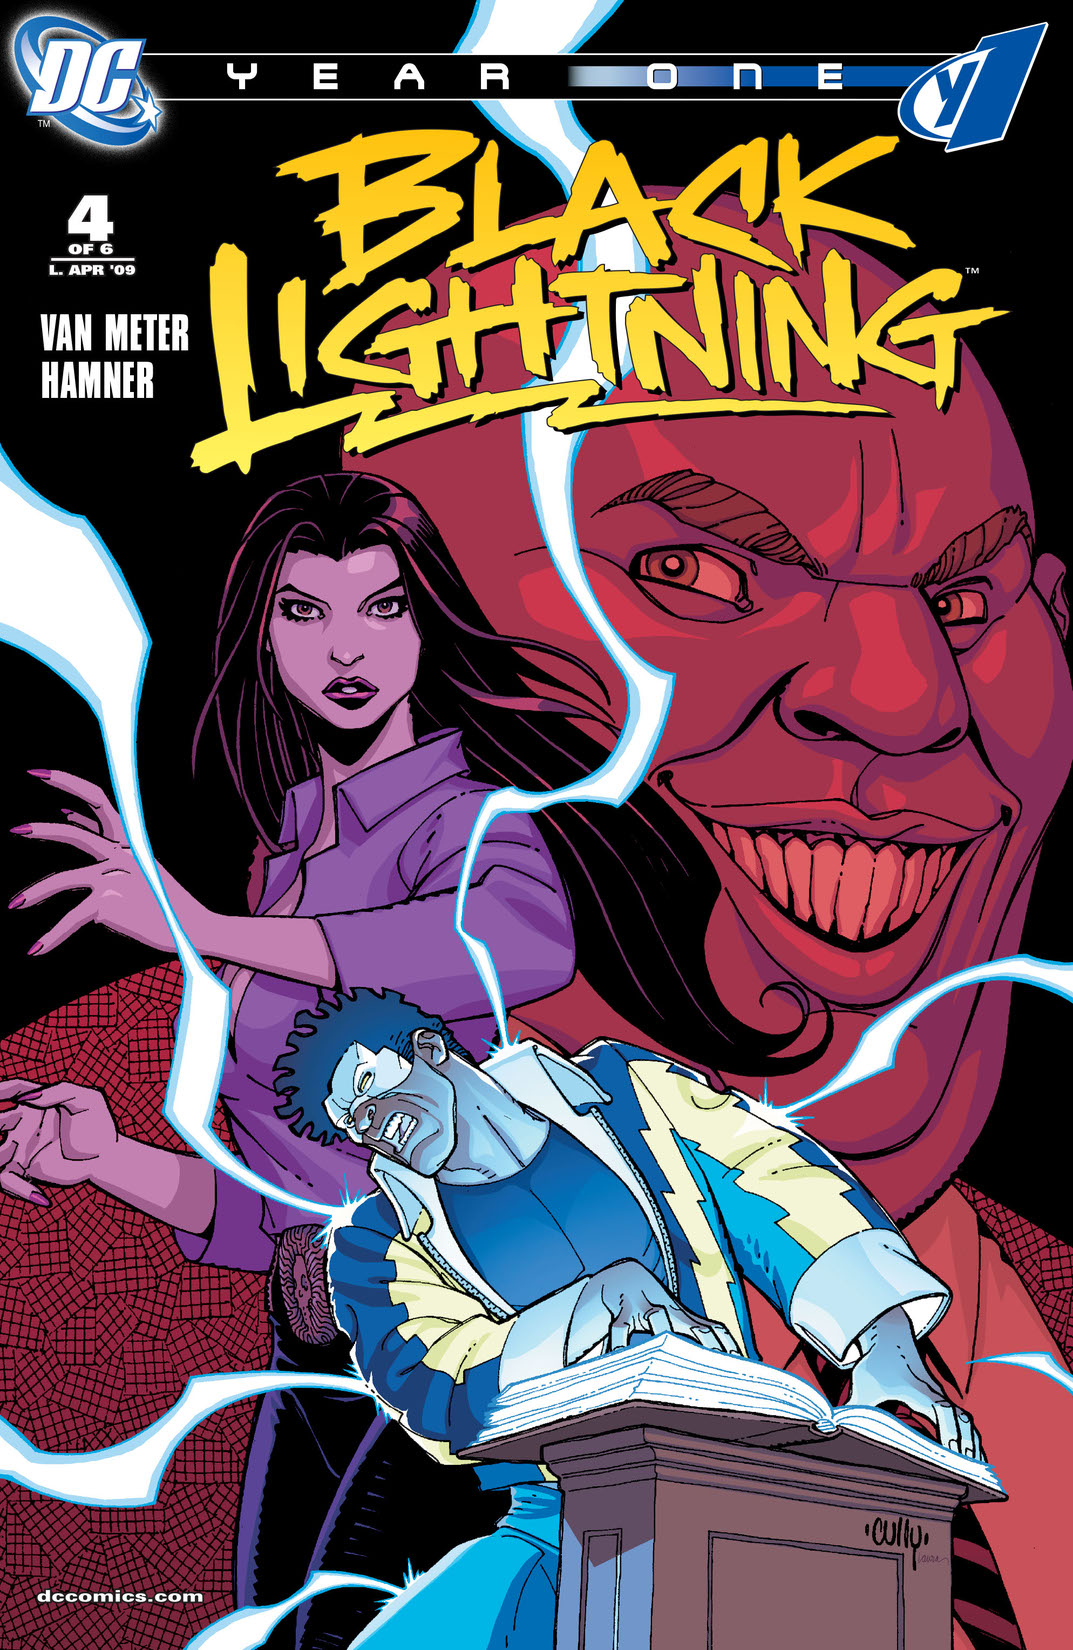 Black Lightning: Year One #4 preview images